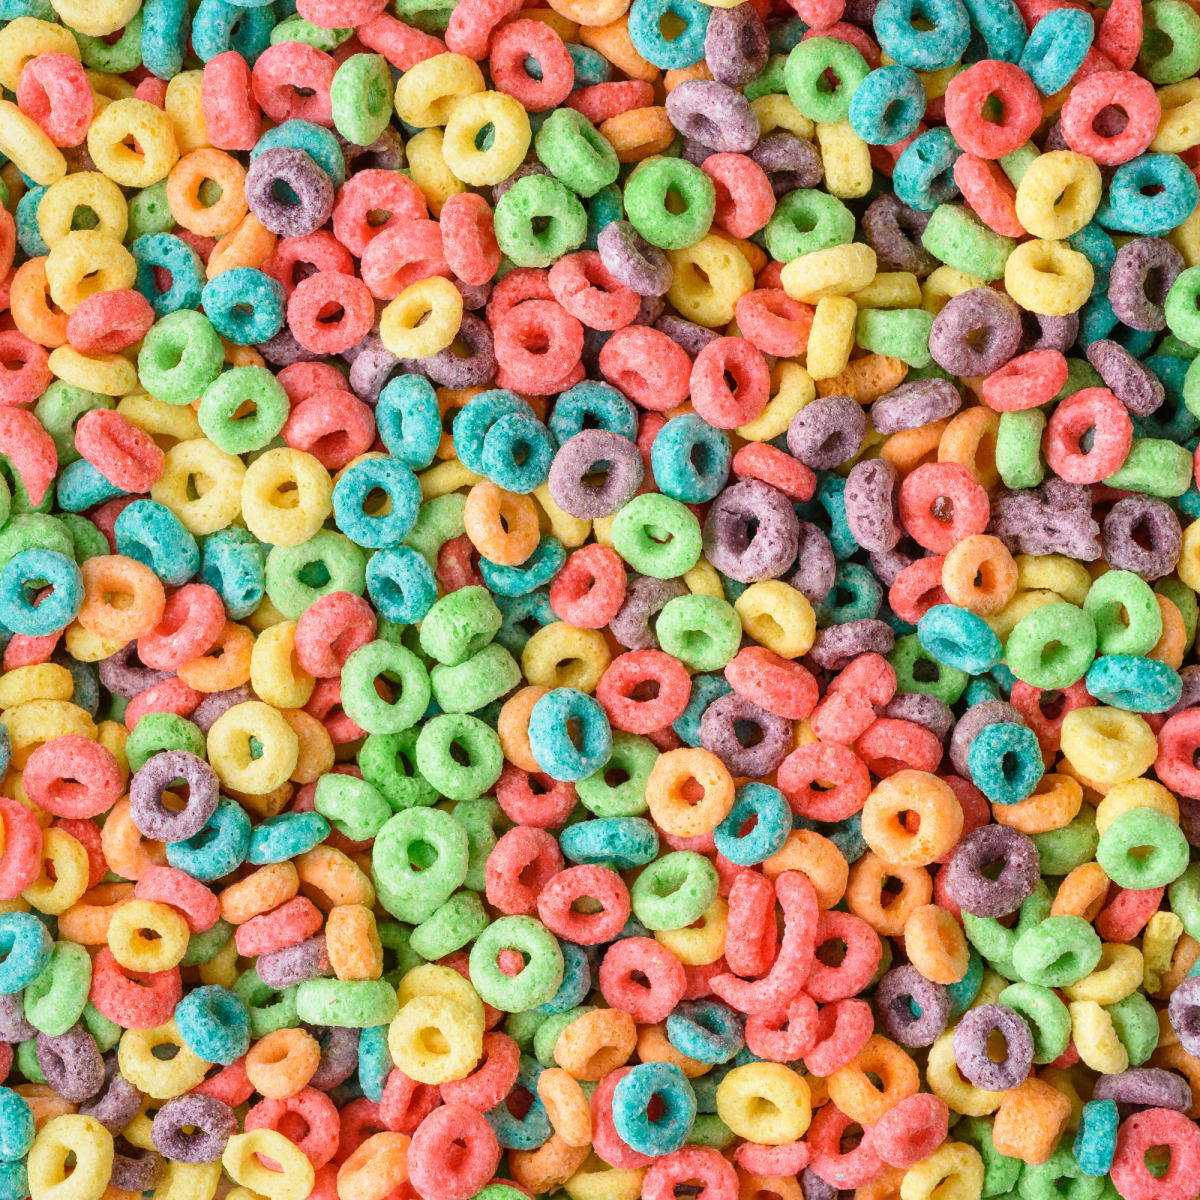 The Second Bowl of Cereal and Other Economic Theories